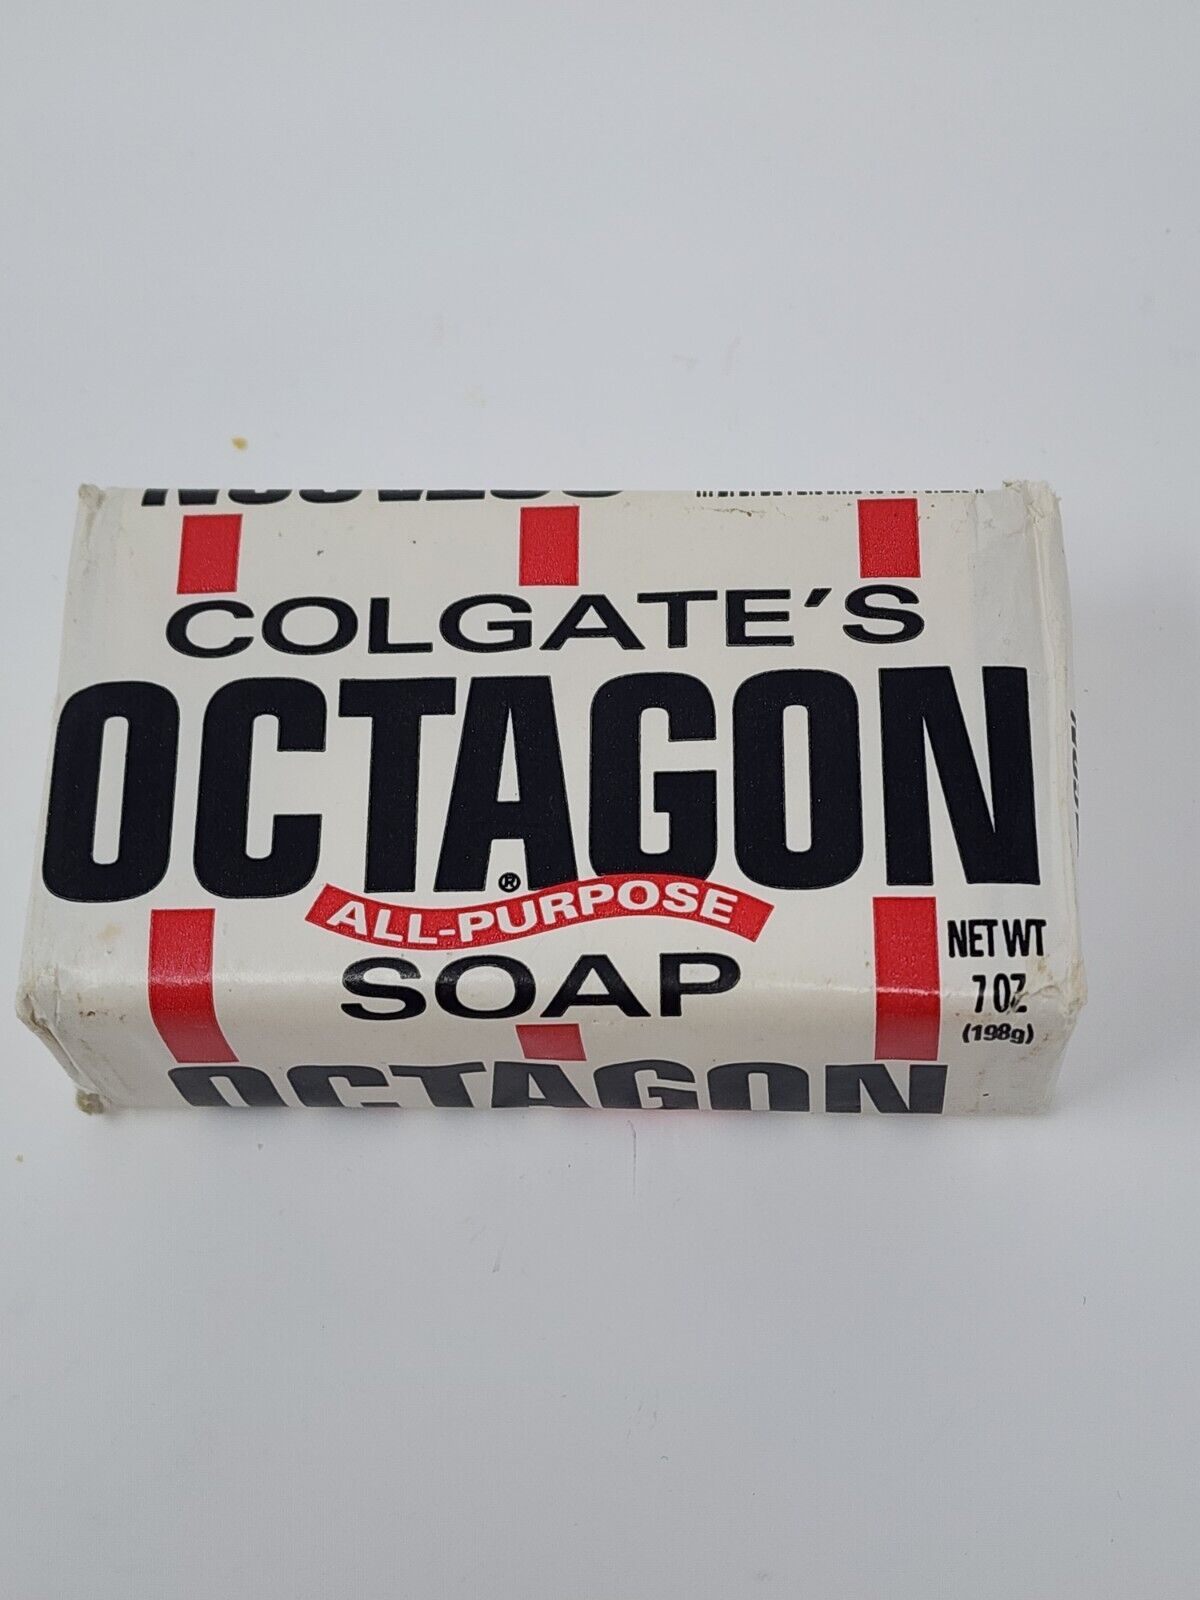 Vintage Octagon Colgate Soap Discontinued Still Sealed NOS Classic Packaging